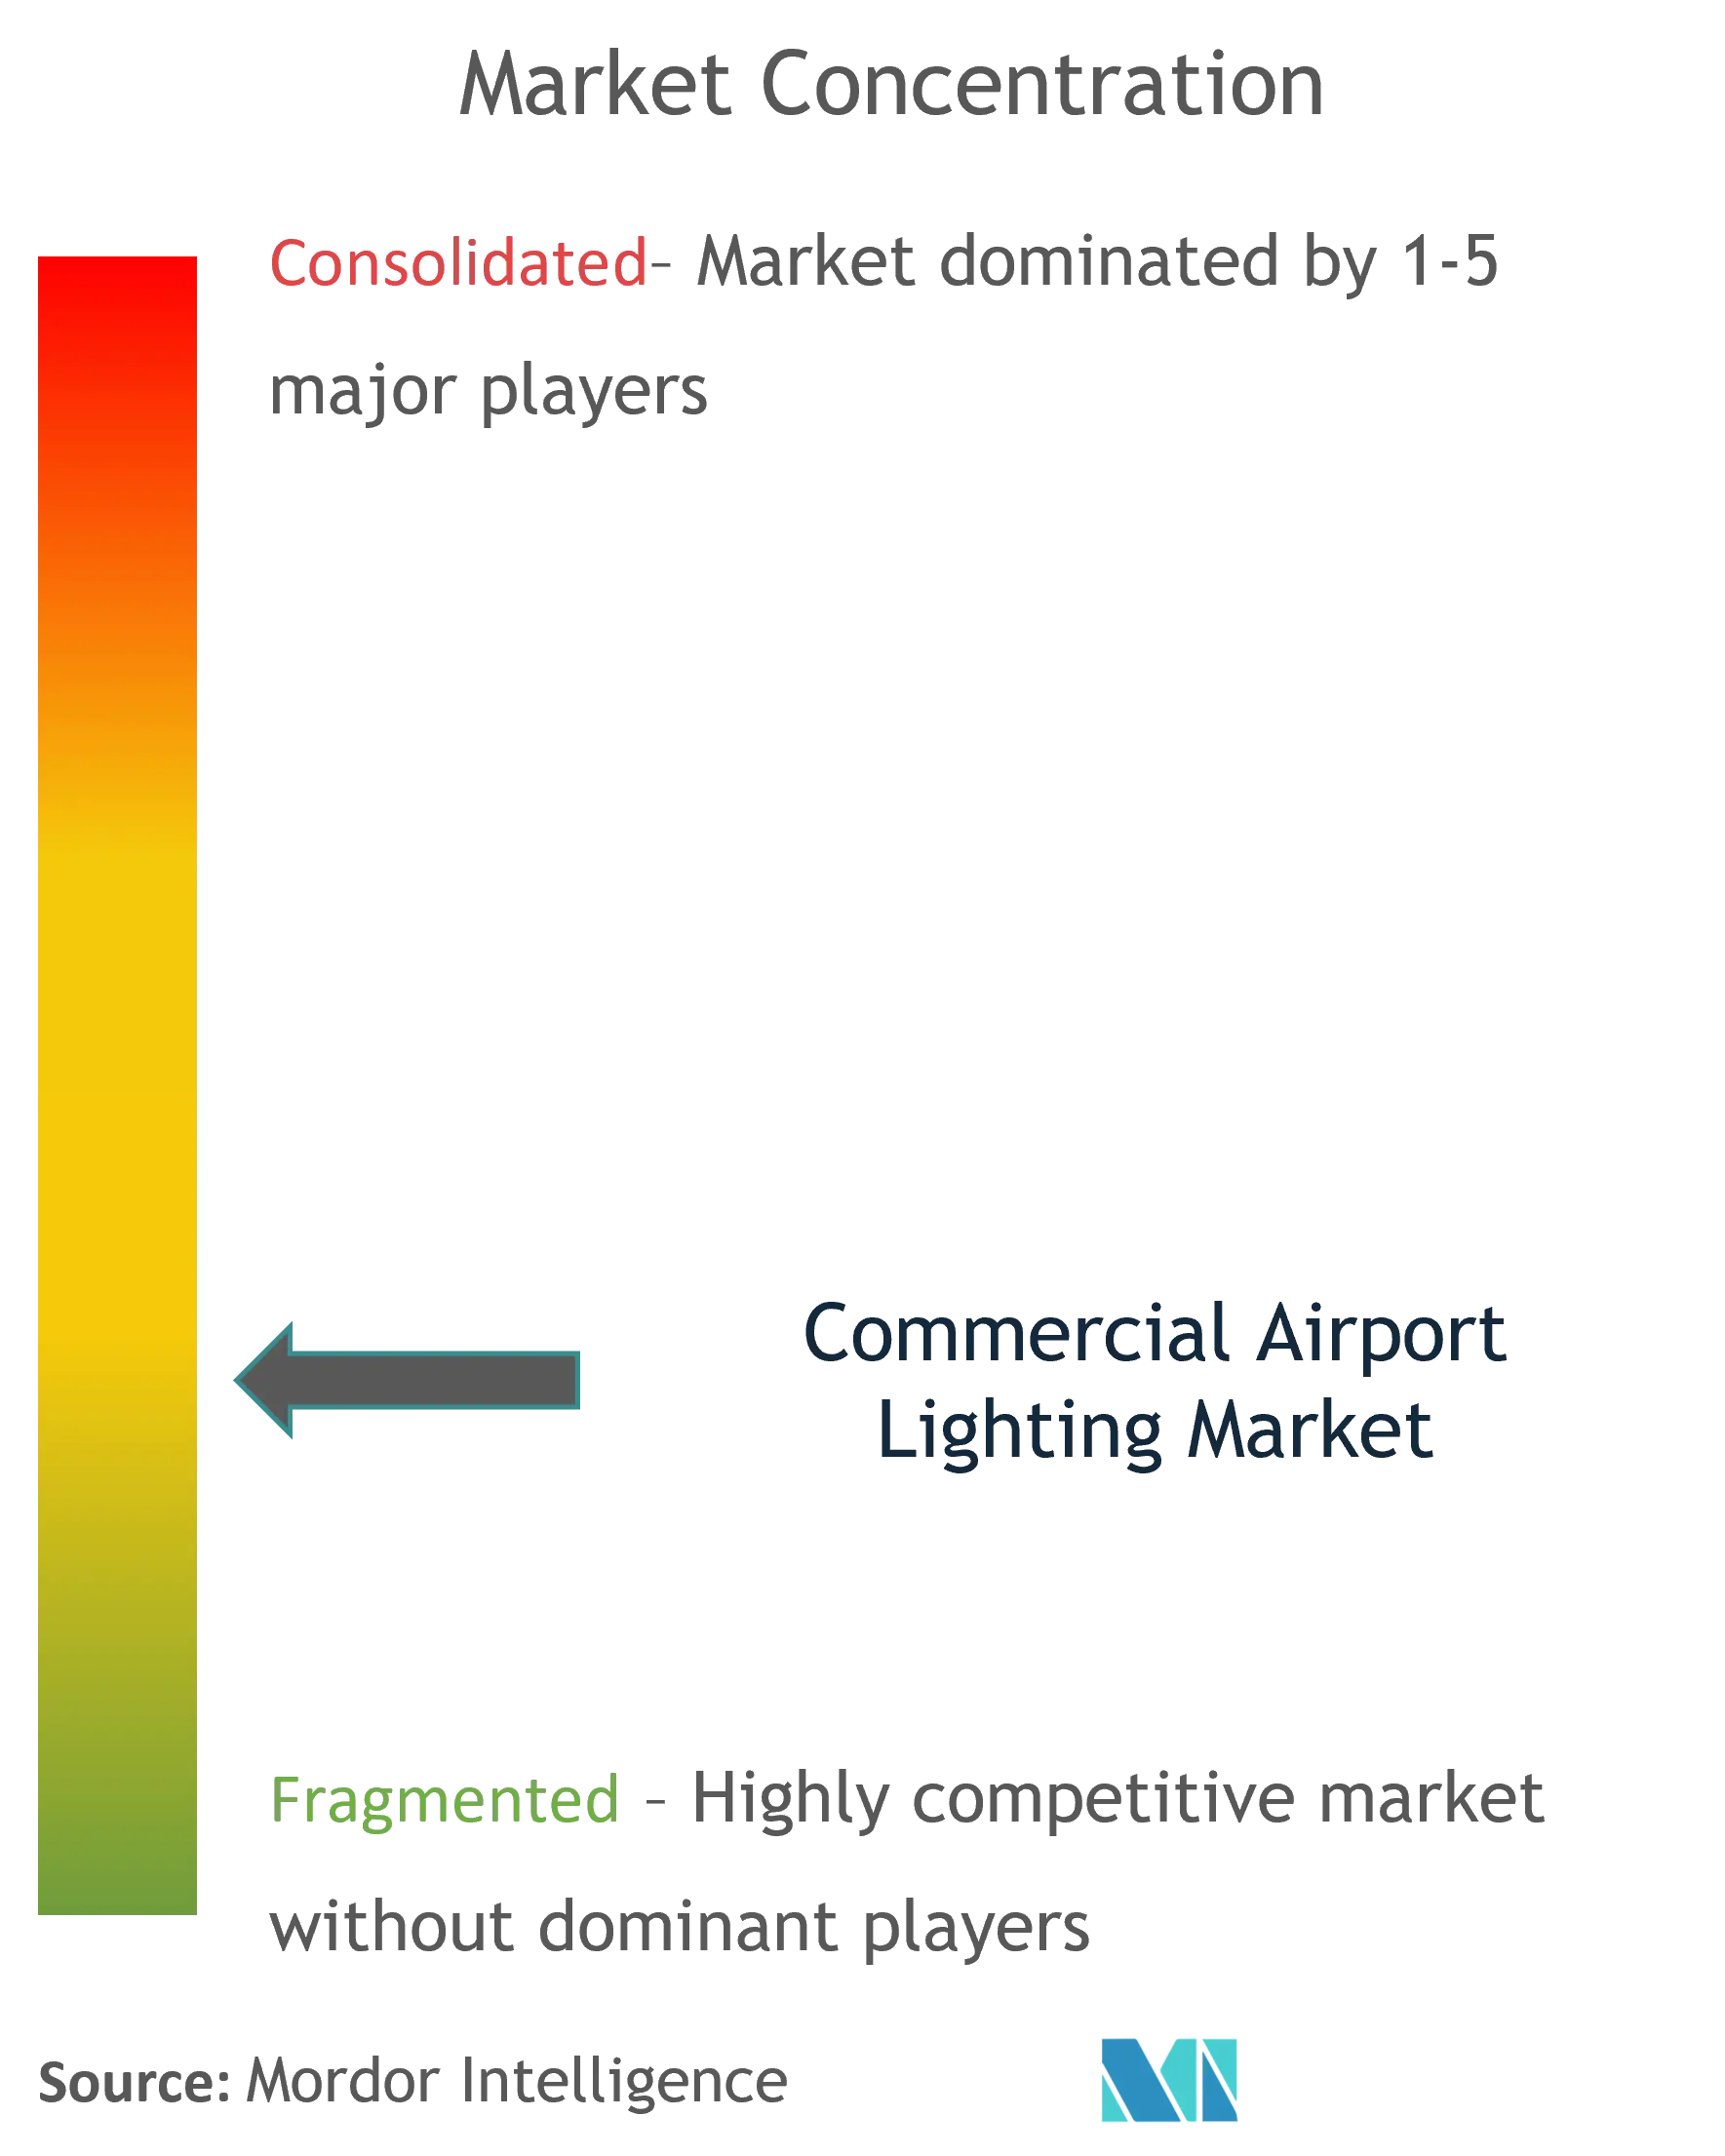  Flight Light Inc., S4GA, Avlite Systems, AMA Private Limited, Airport Lighting Company, Electromax, AIRPORT LIGHTING SPECIALISTS